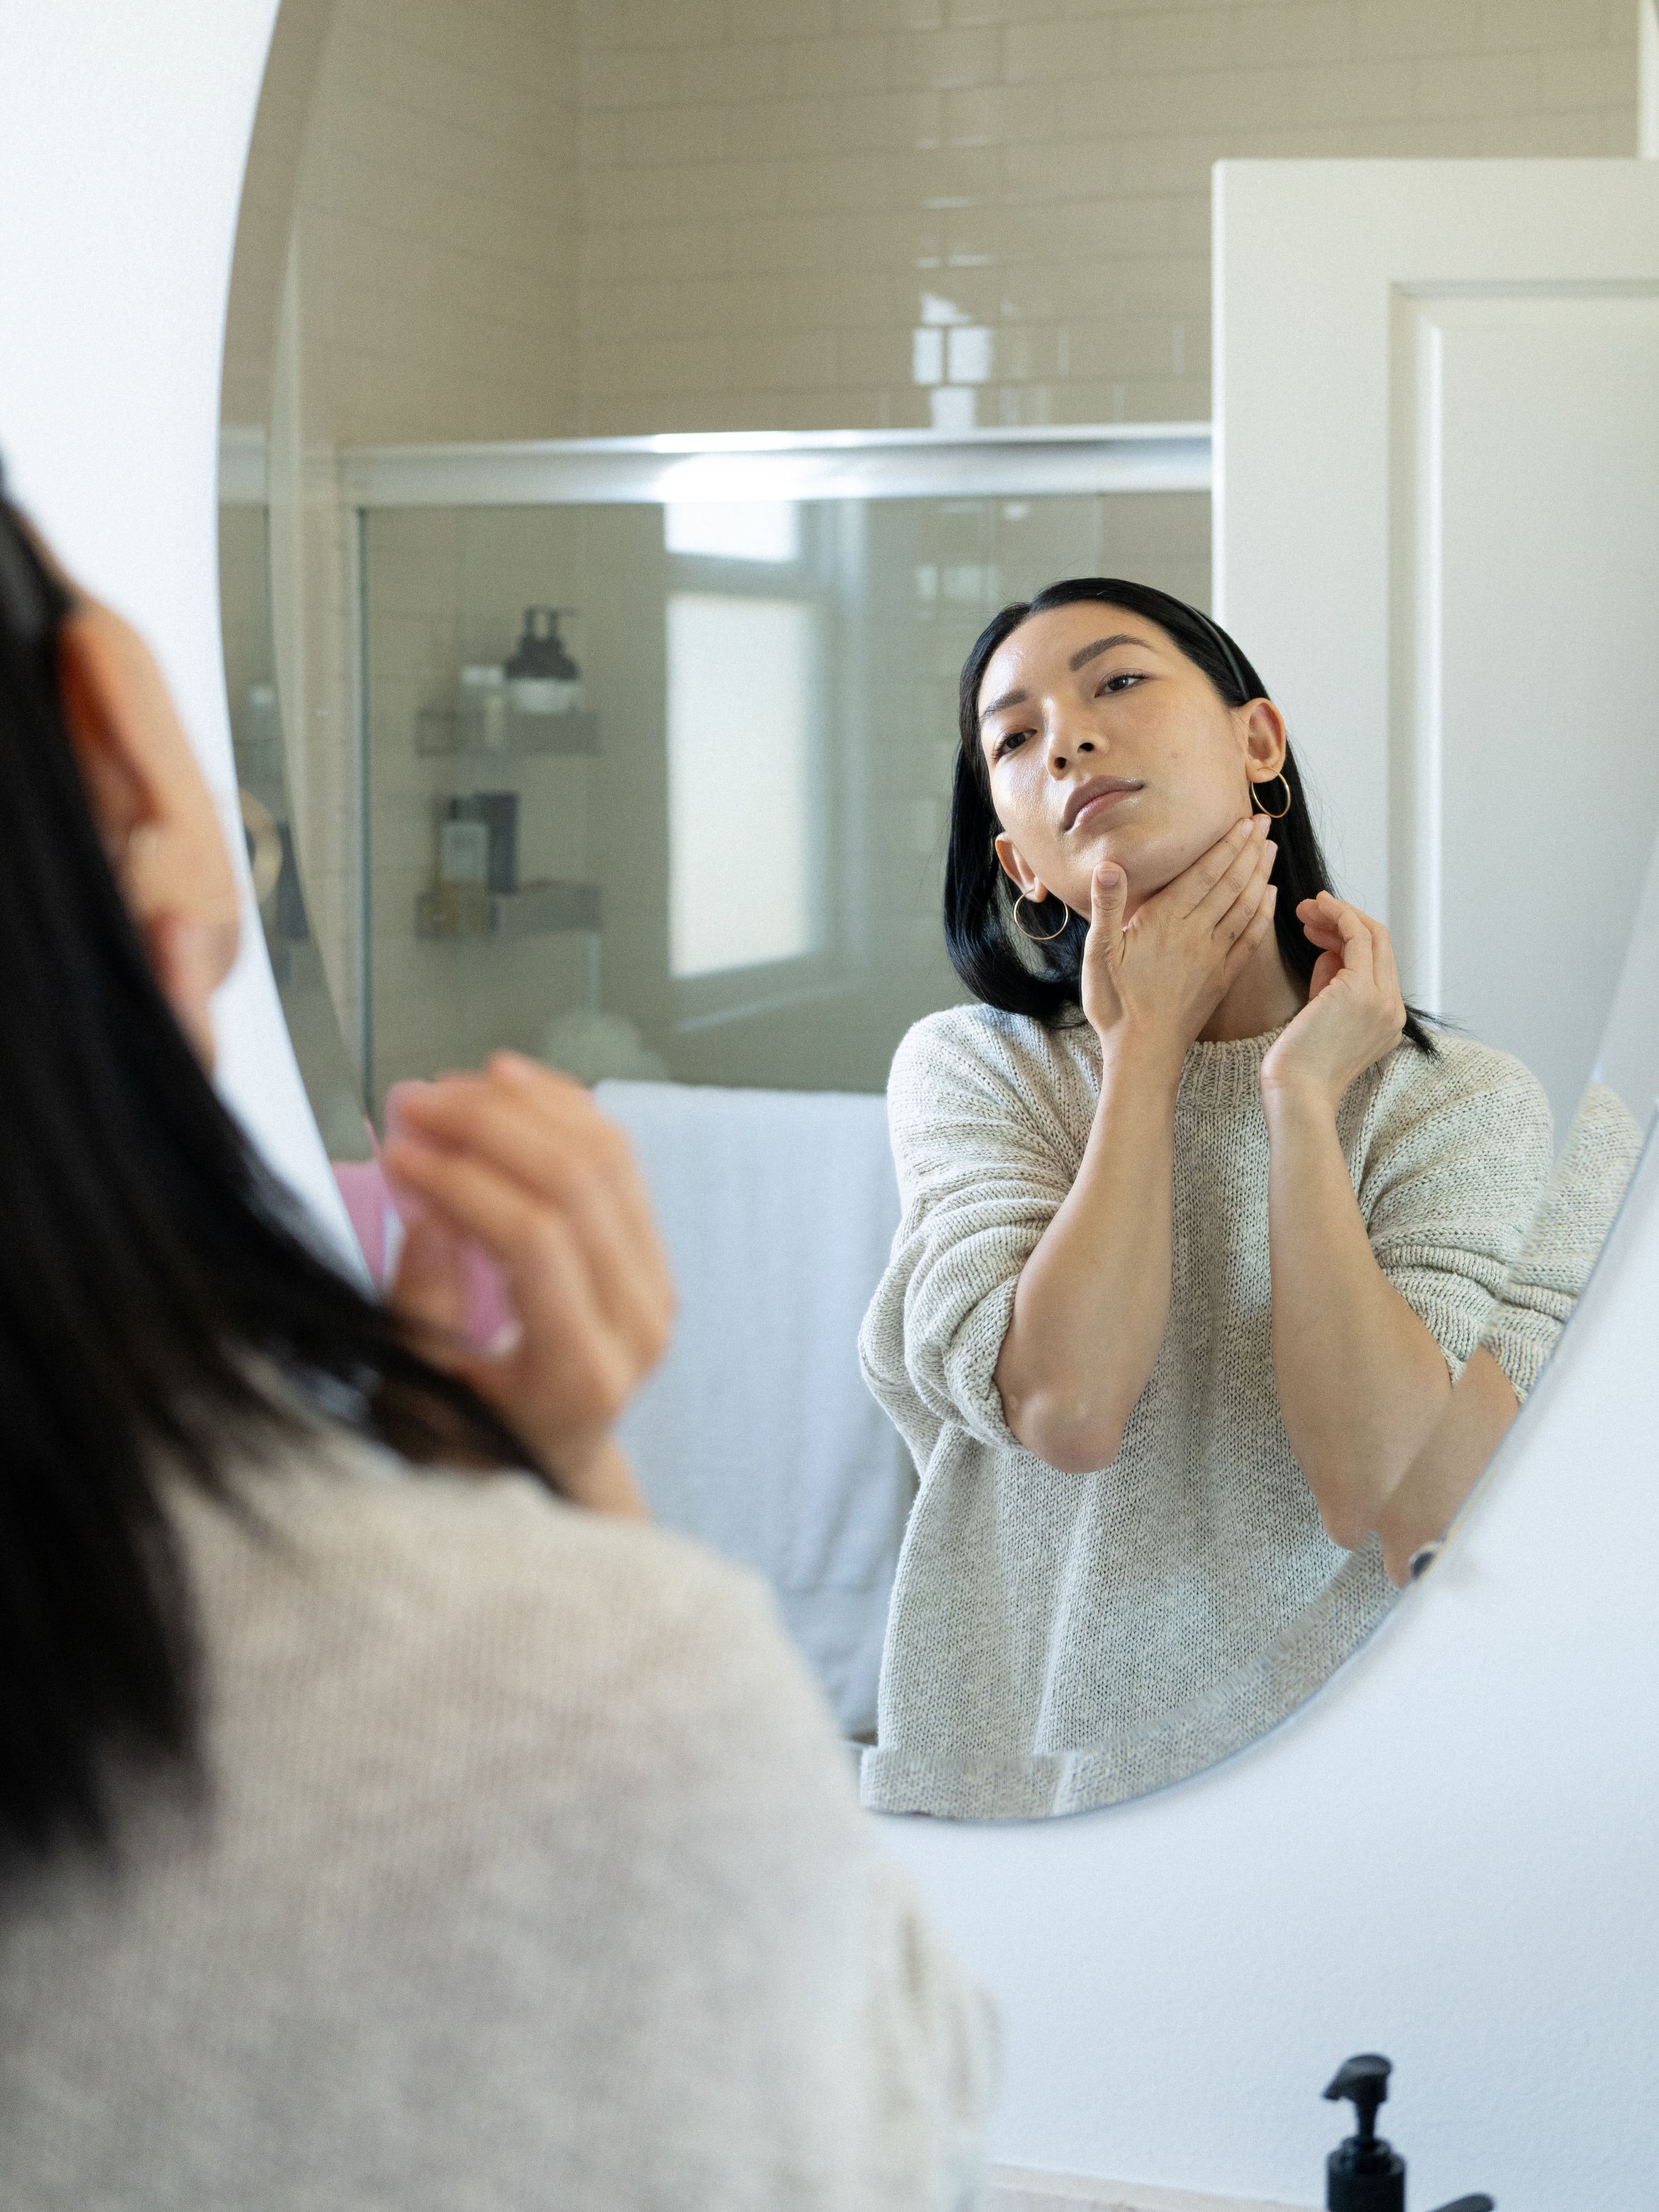 Stephanie Liu Hjelmeseth applying skincare and massaging her neck in front of a mirror.